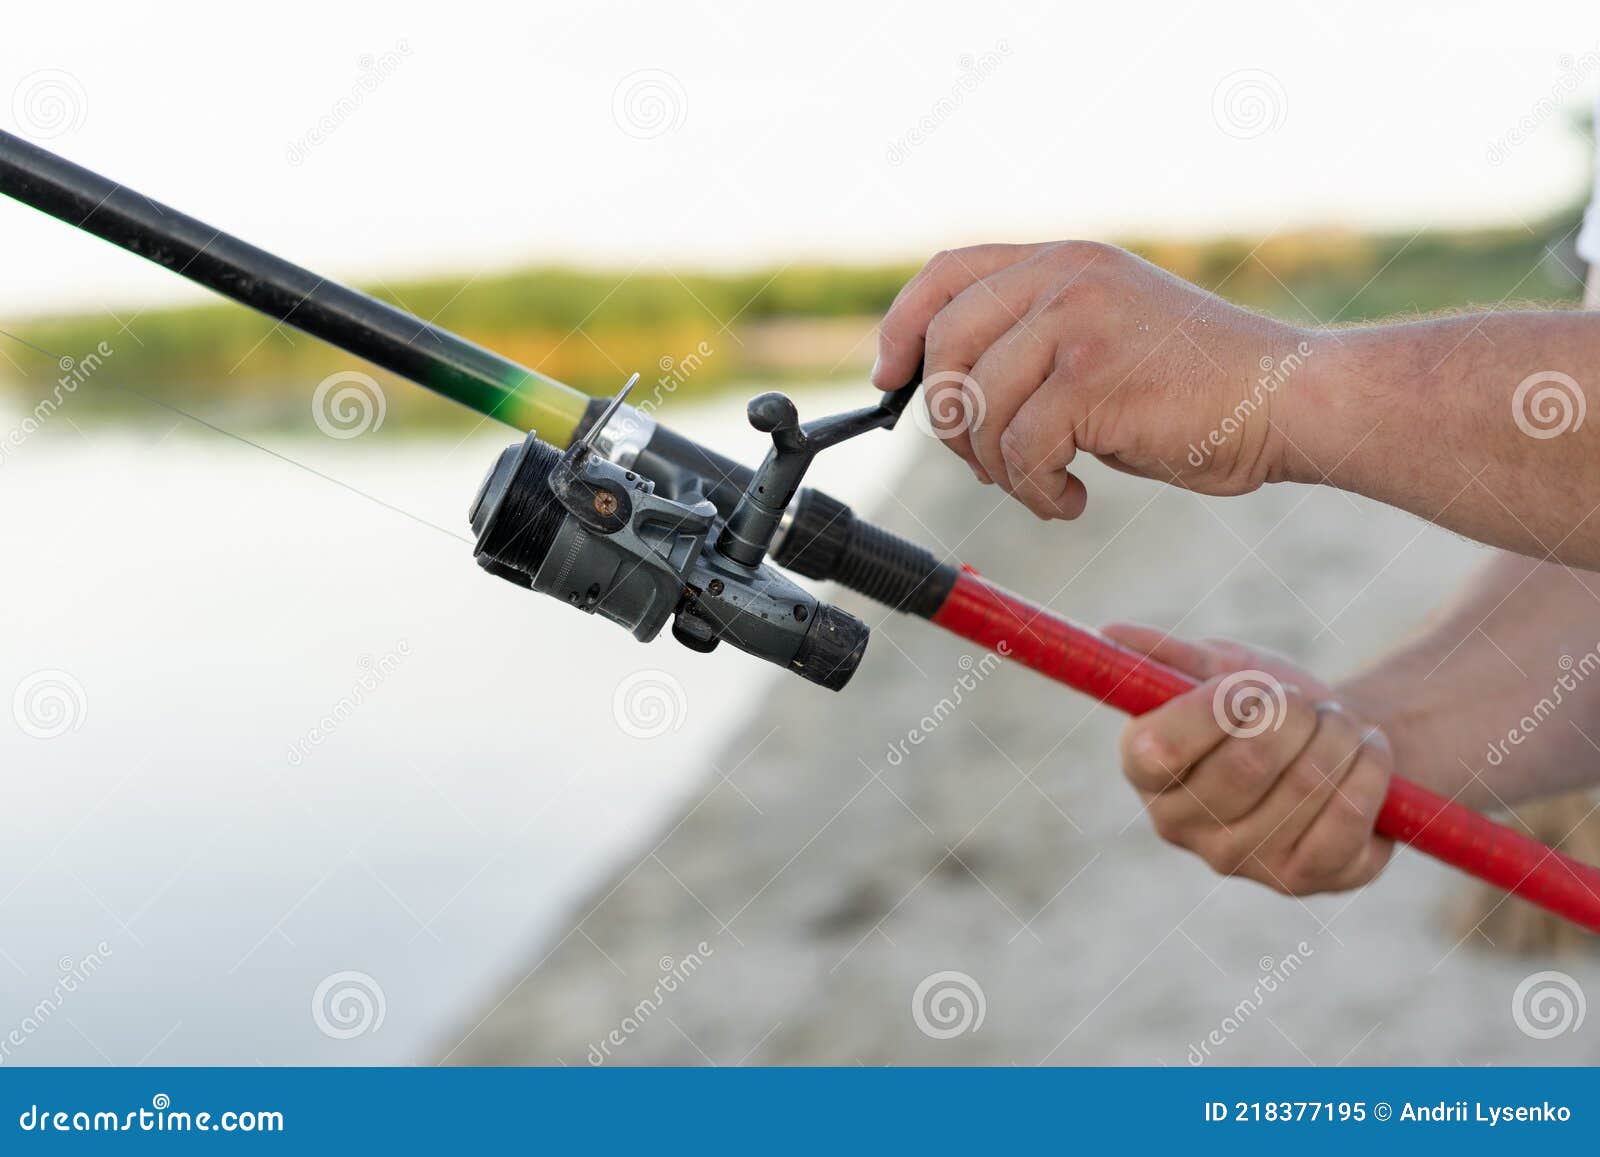 Fishing Rod in Male Hands Close-up. the Guy Fisherman Twists the Line and  Pulls the Fish. River or Estuary Stock Image - Image of metal, ardour:  218377195